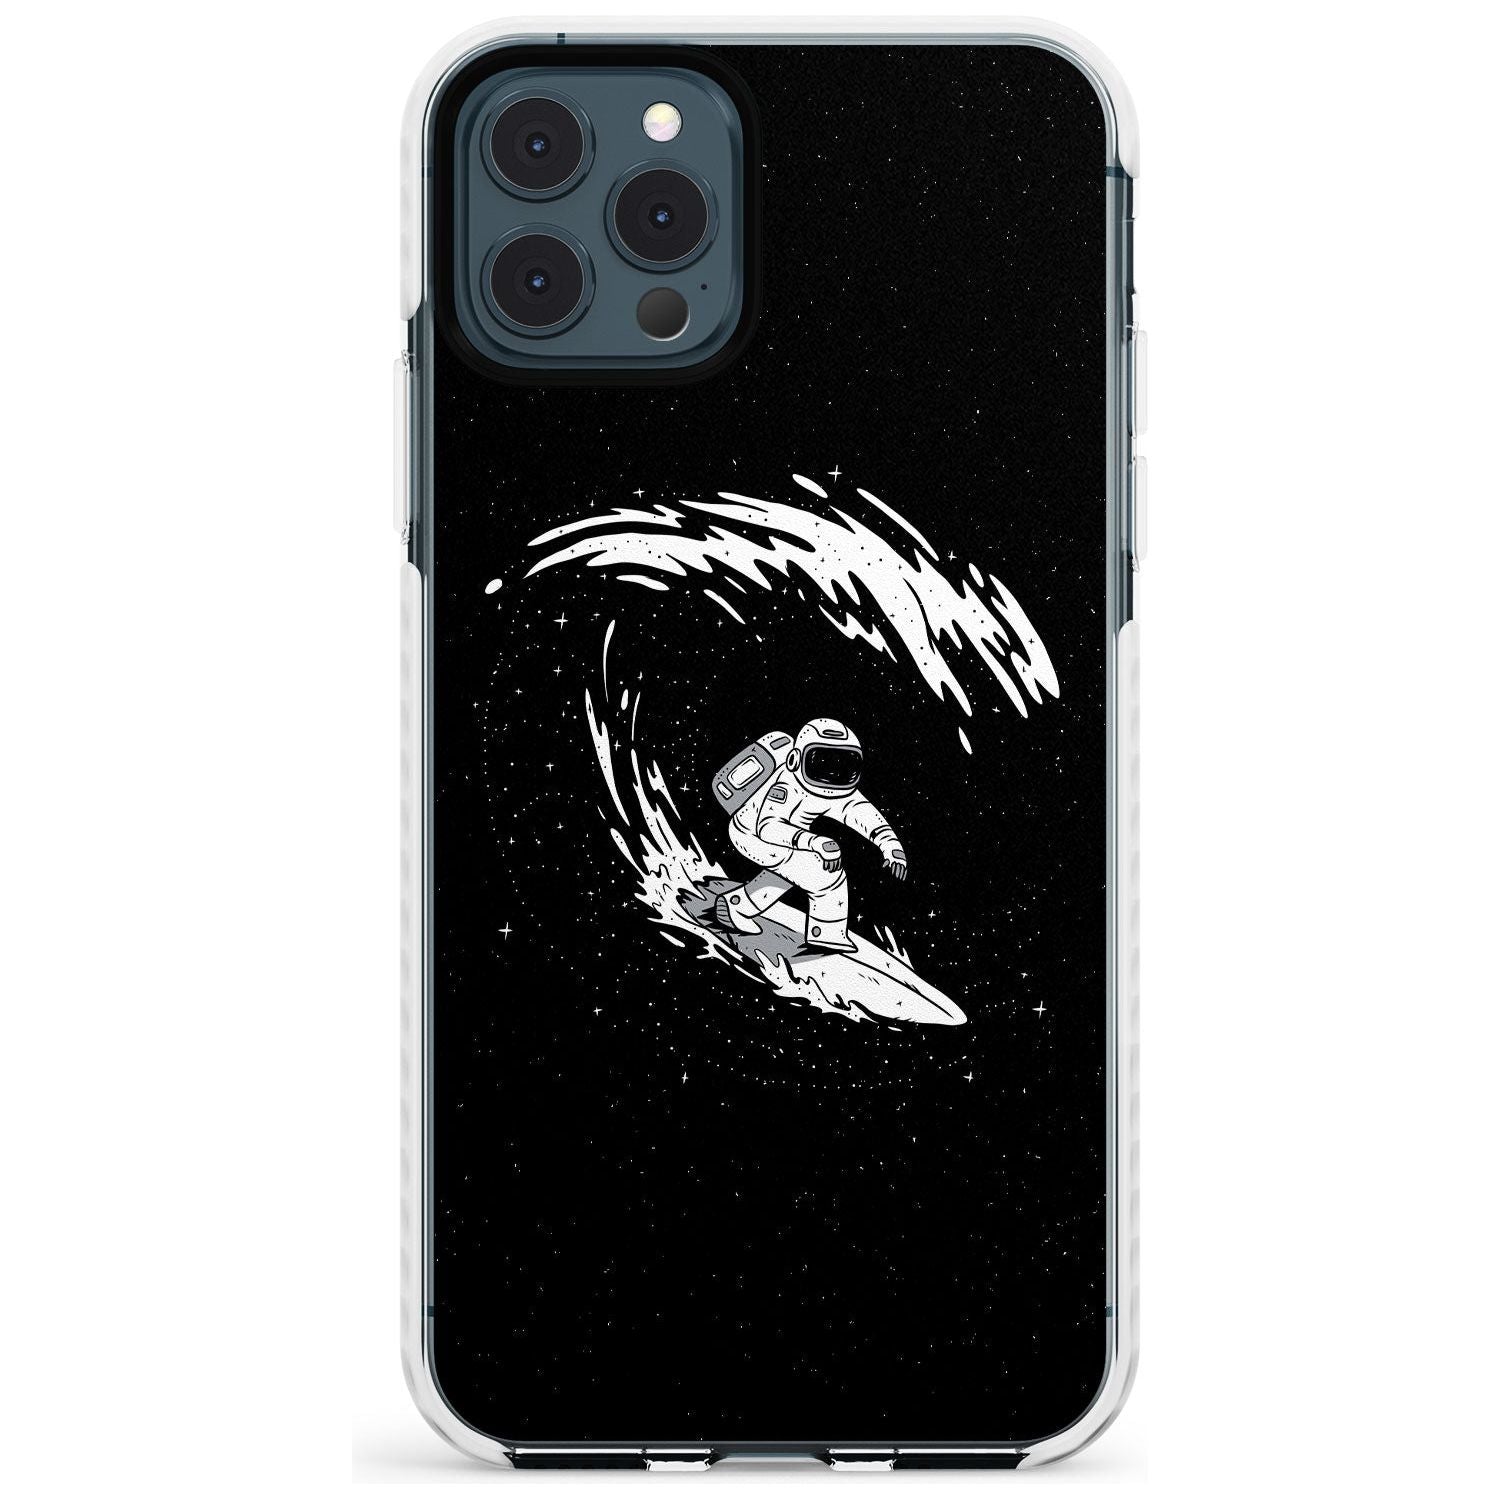 Surfing Astronaut Slim TPU Phone Case for iPhone 11 Pro Max